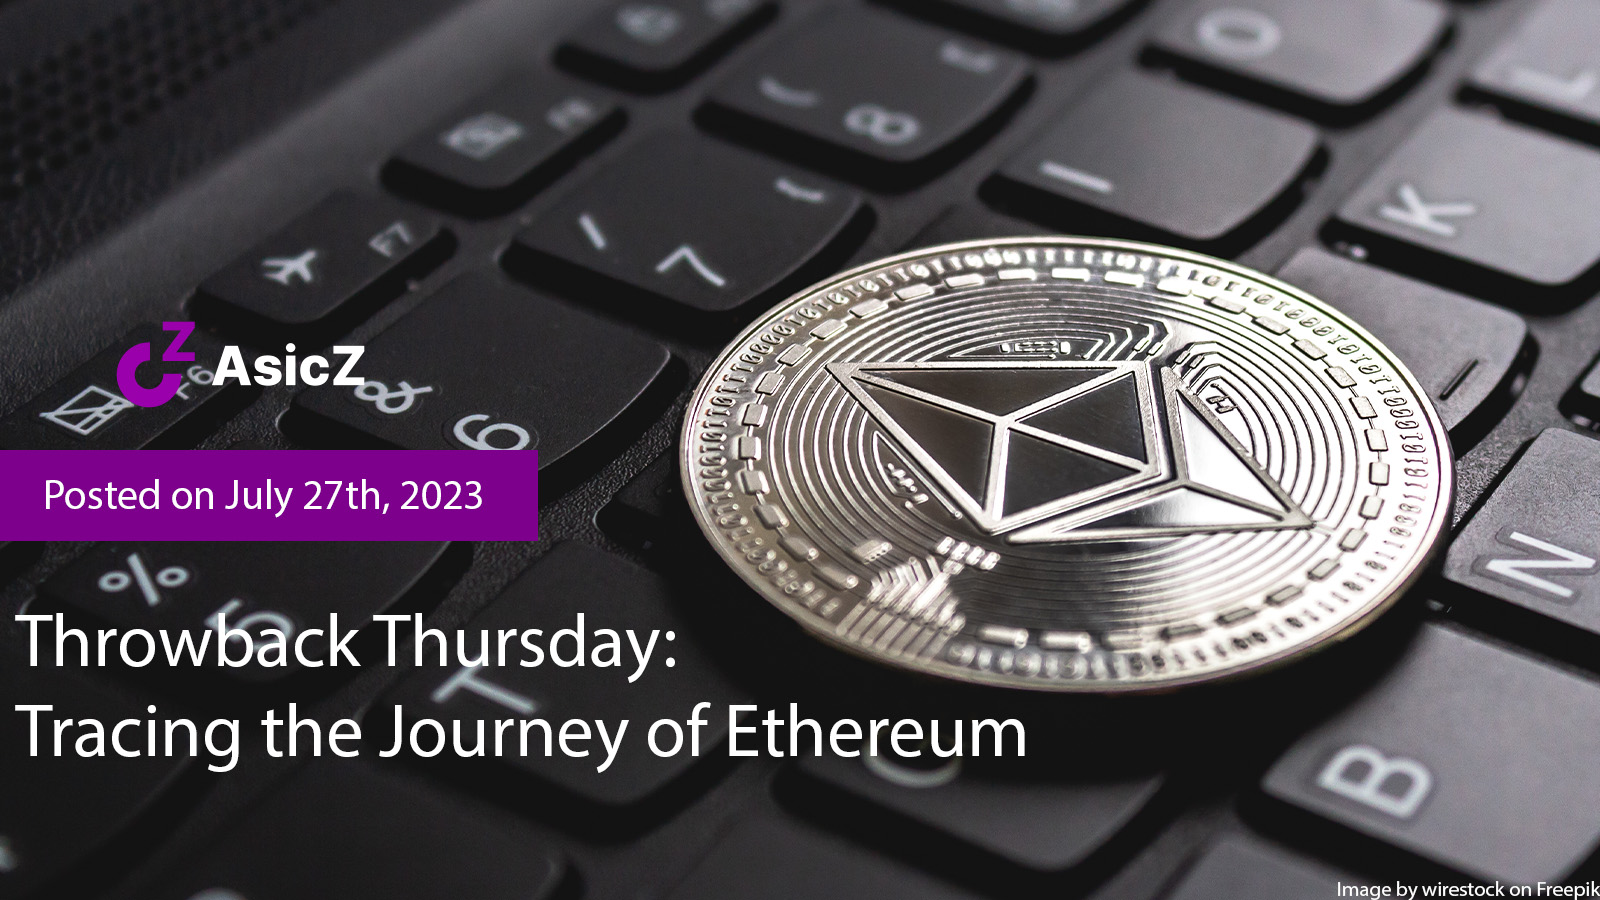 Throwback Thursday: Tracing the Journey of Ethereum